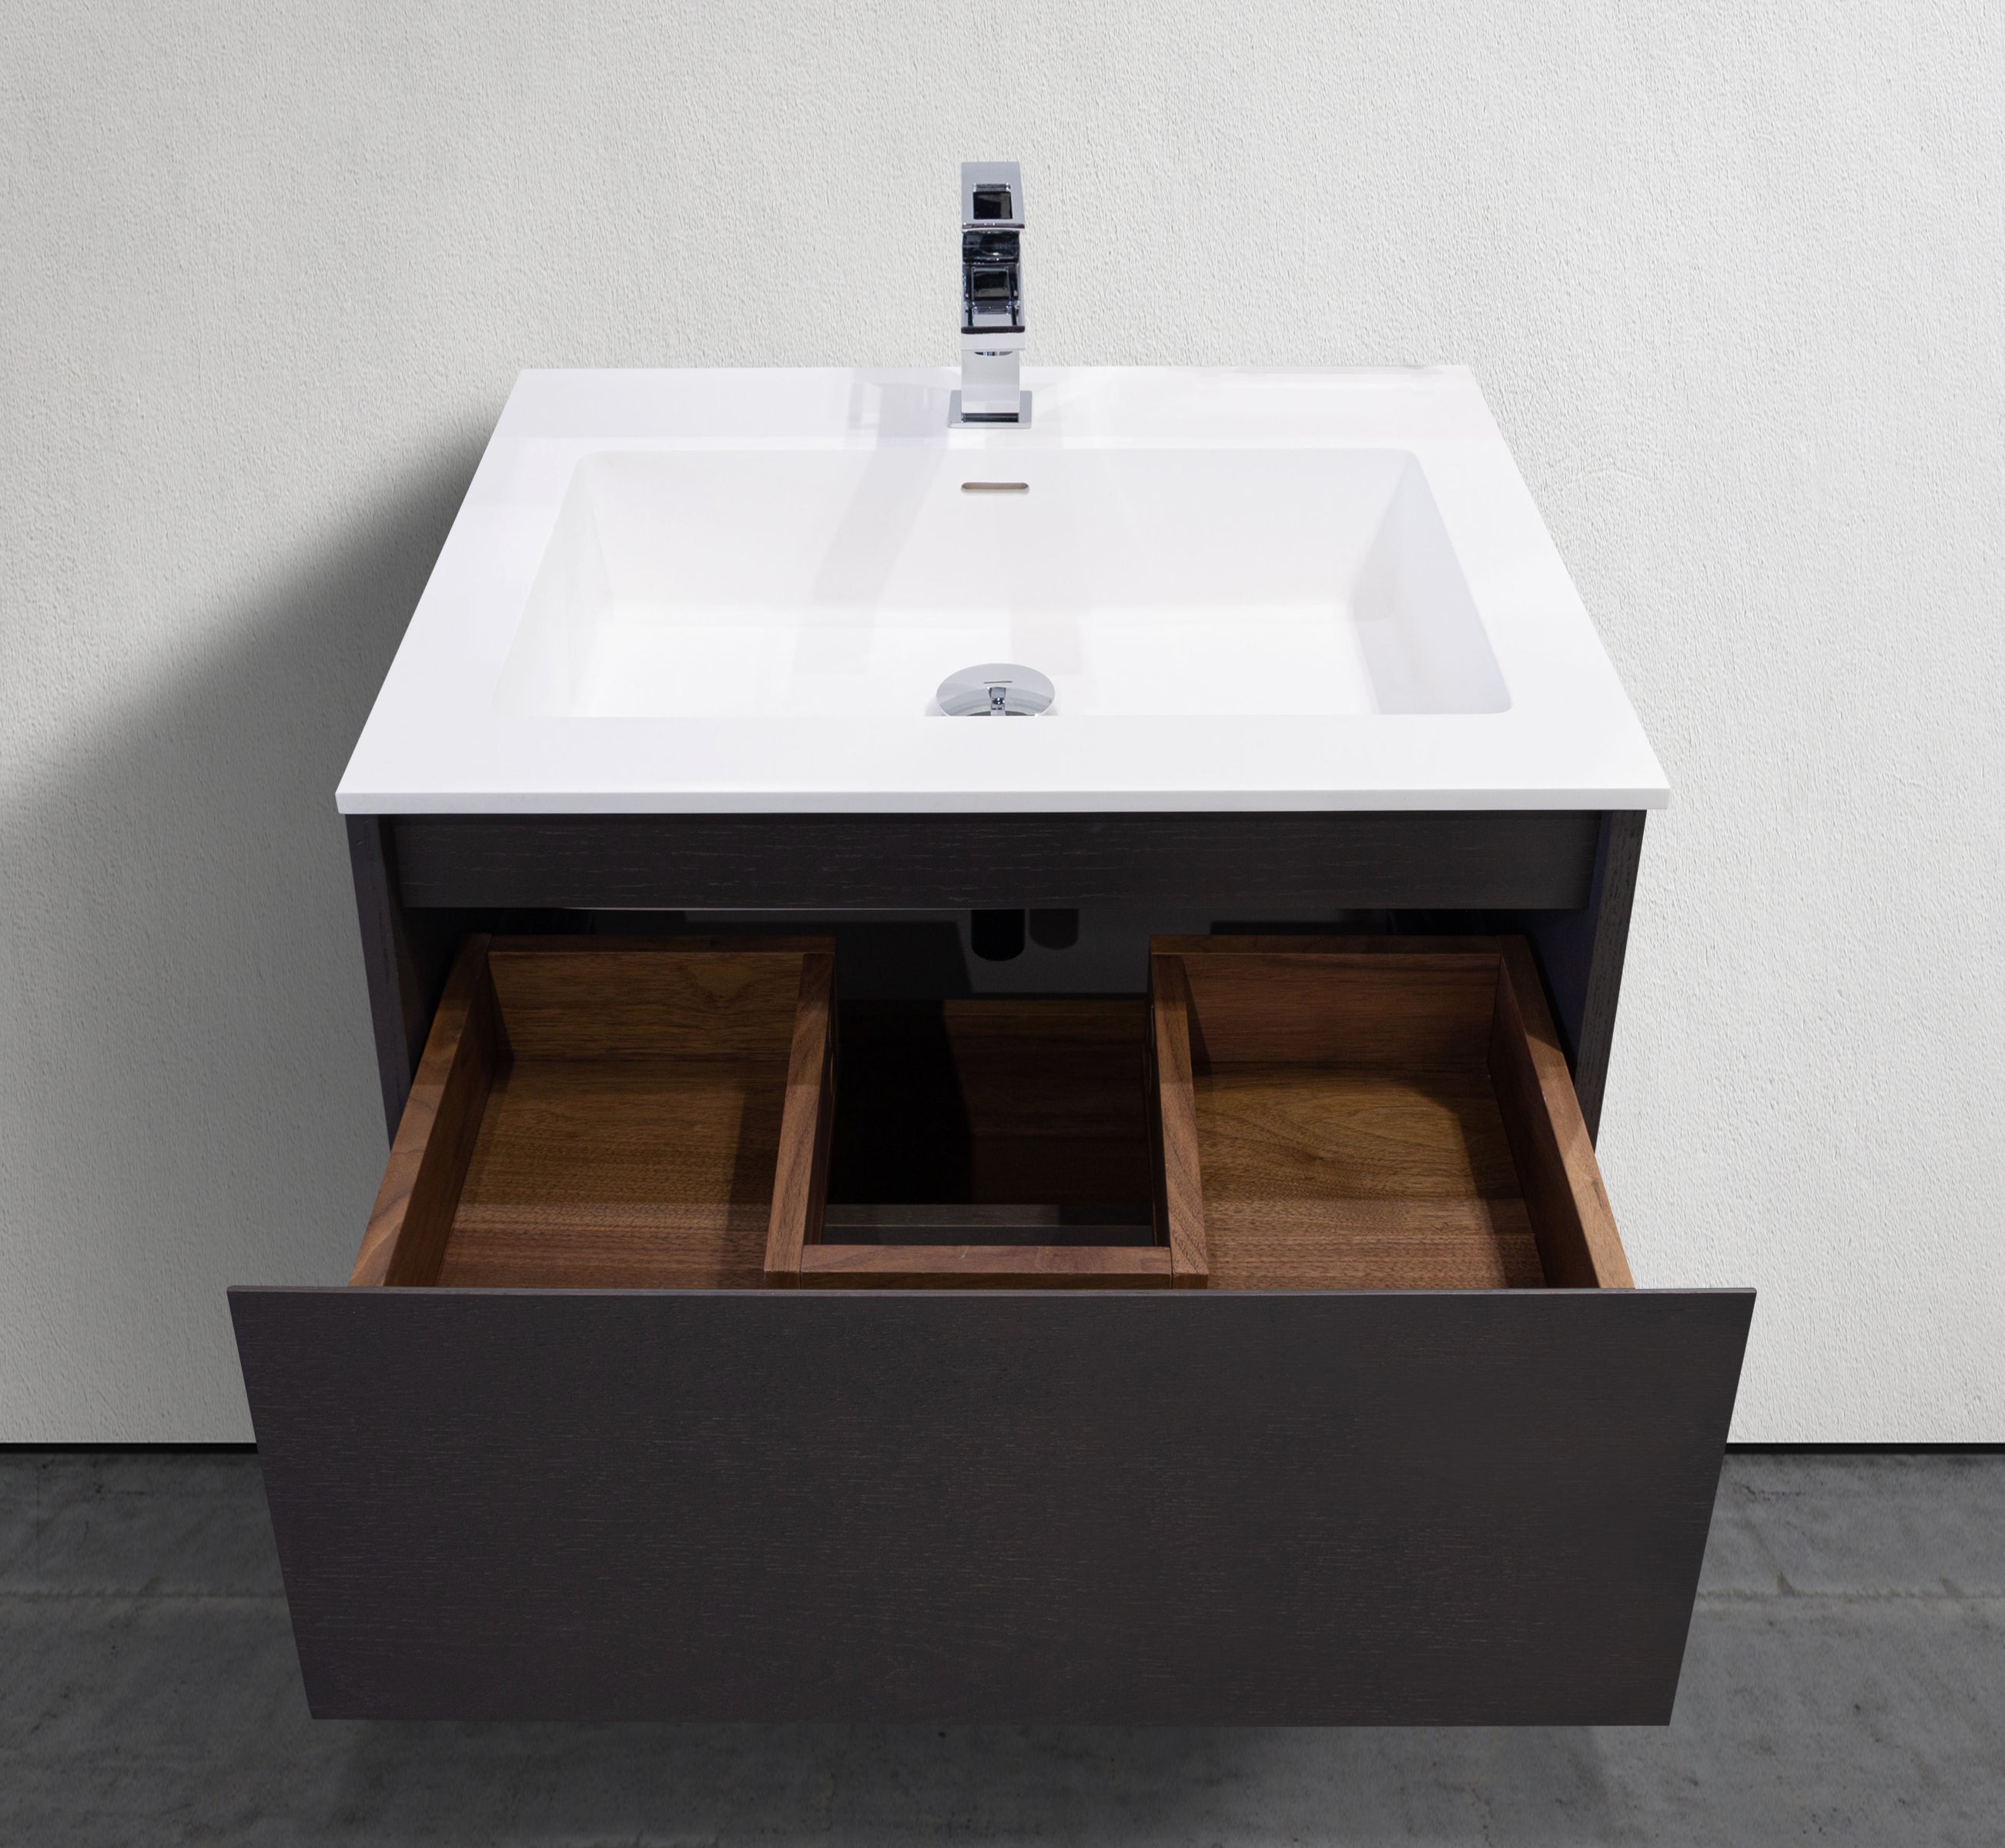 MC 600E top view with open plumbing drawer #size_24"